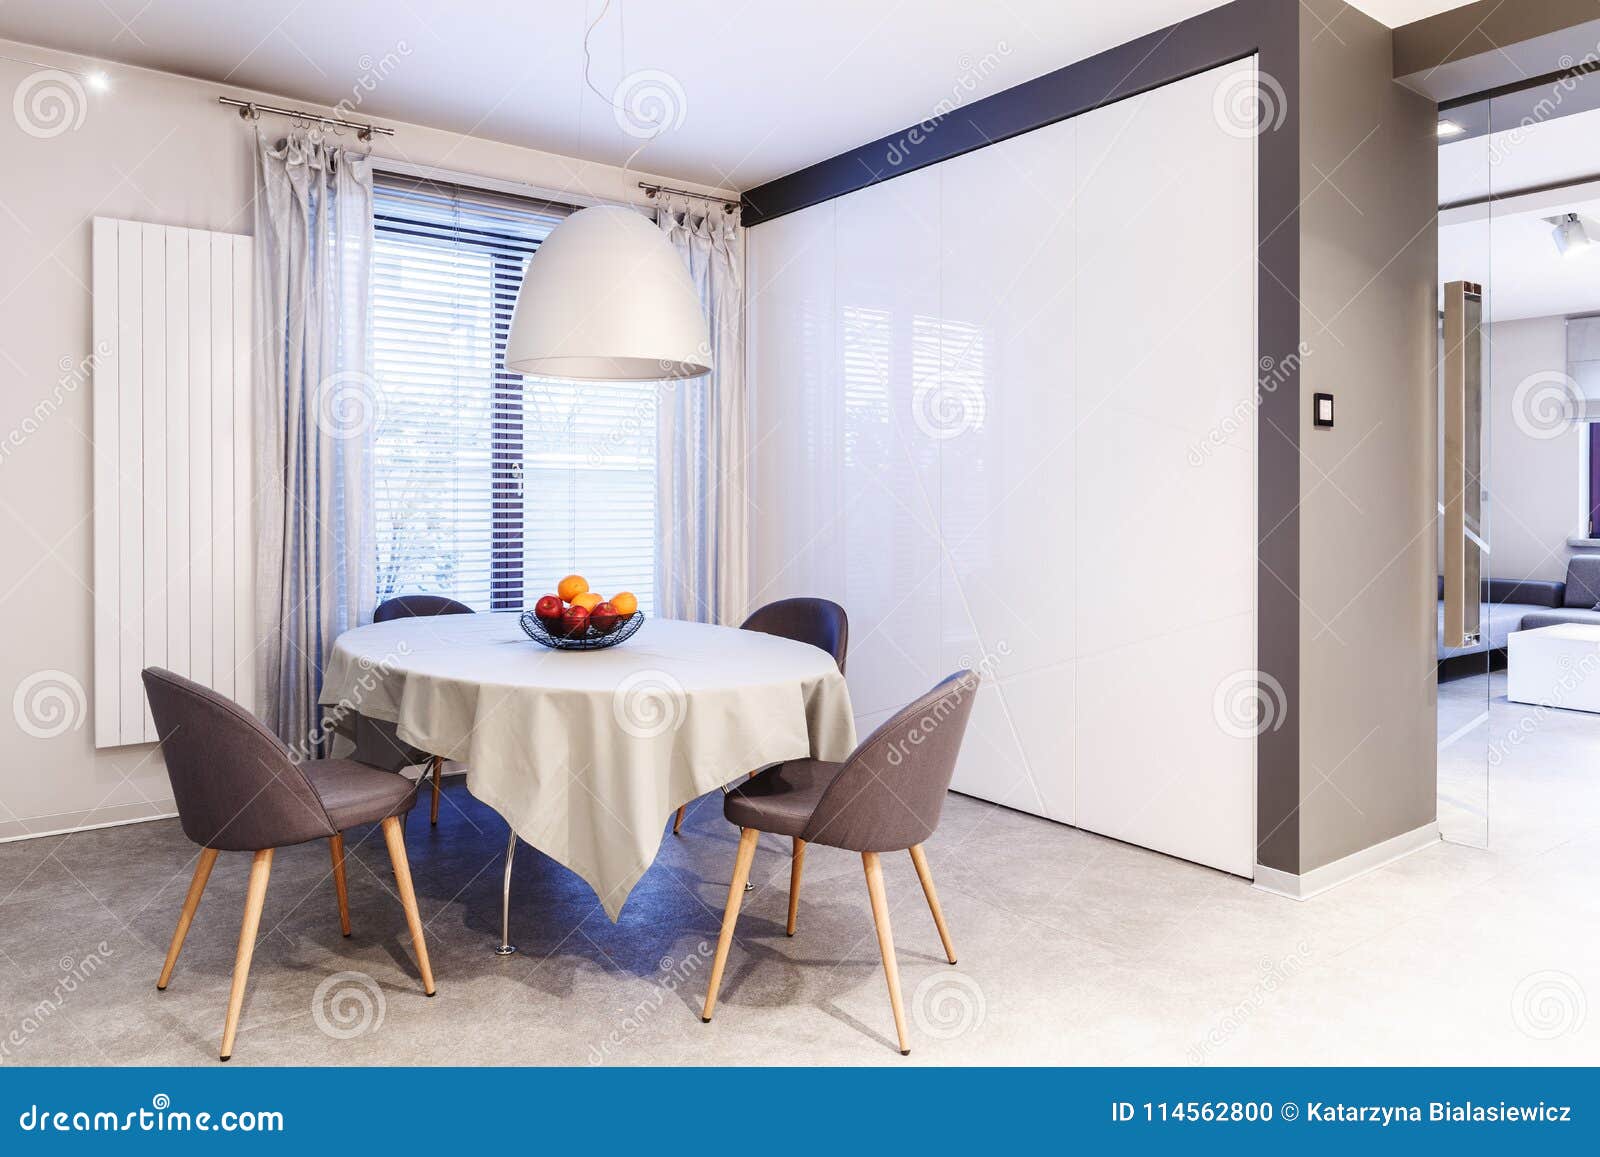 Simple Dining Room Interior Stock Photo Image Of